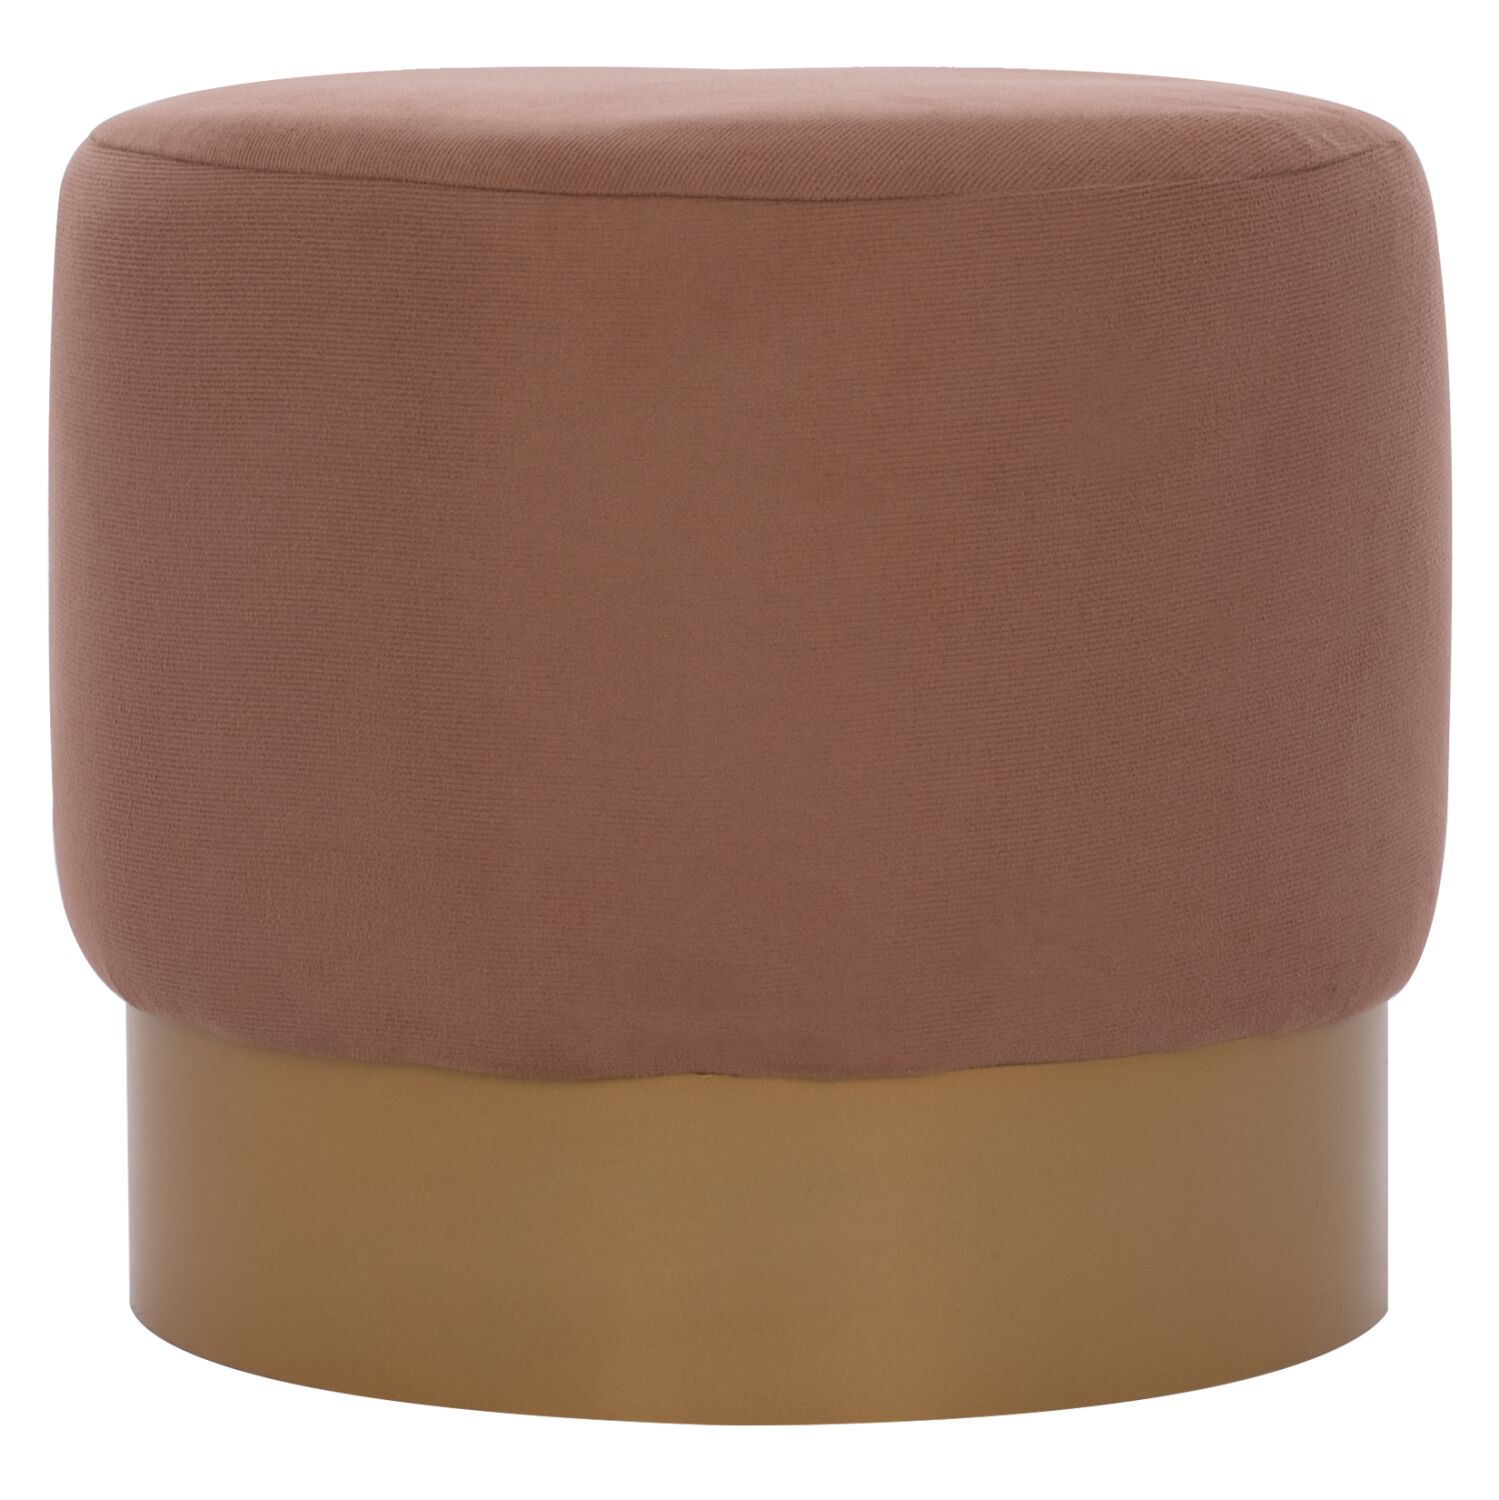 ROUND POUF/STOOL HM9260.04 BROWN FABRIC, GOLD ROUND BASE